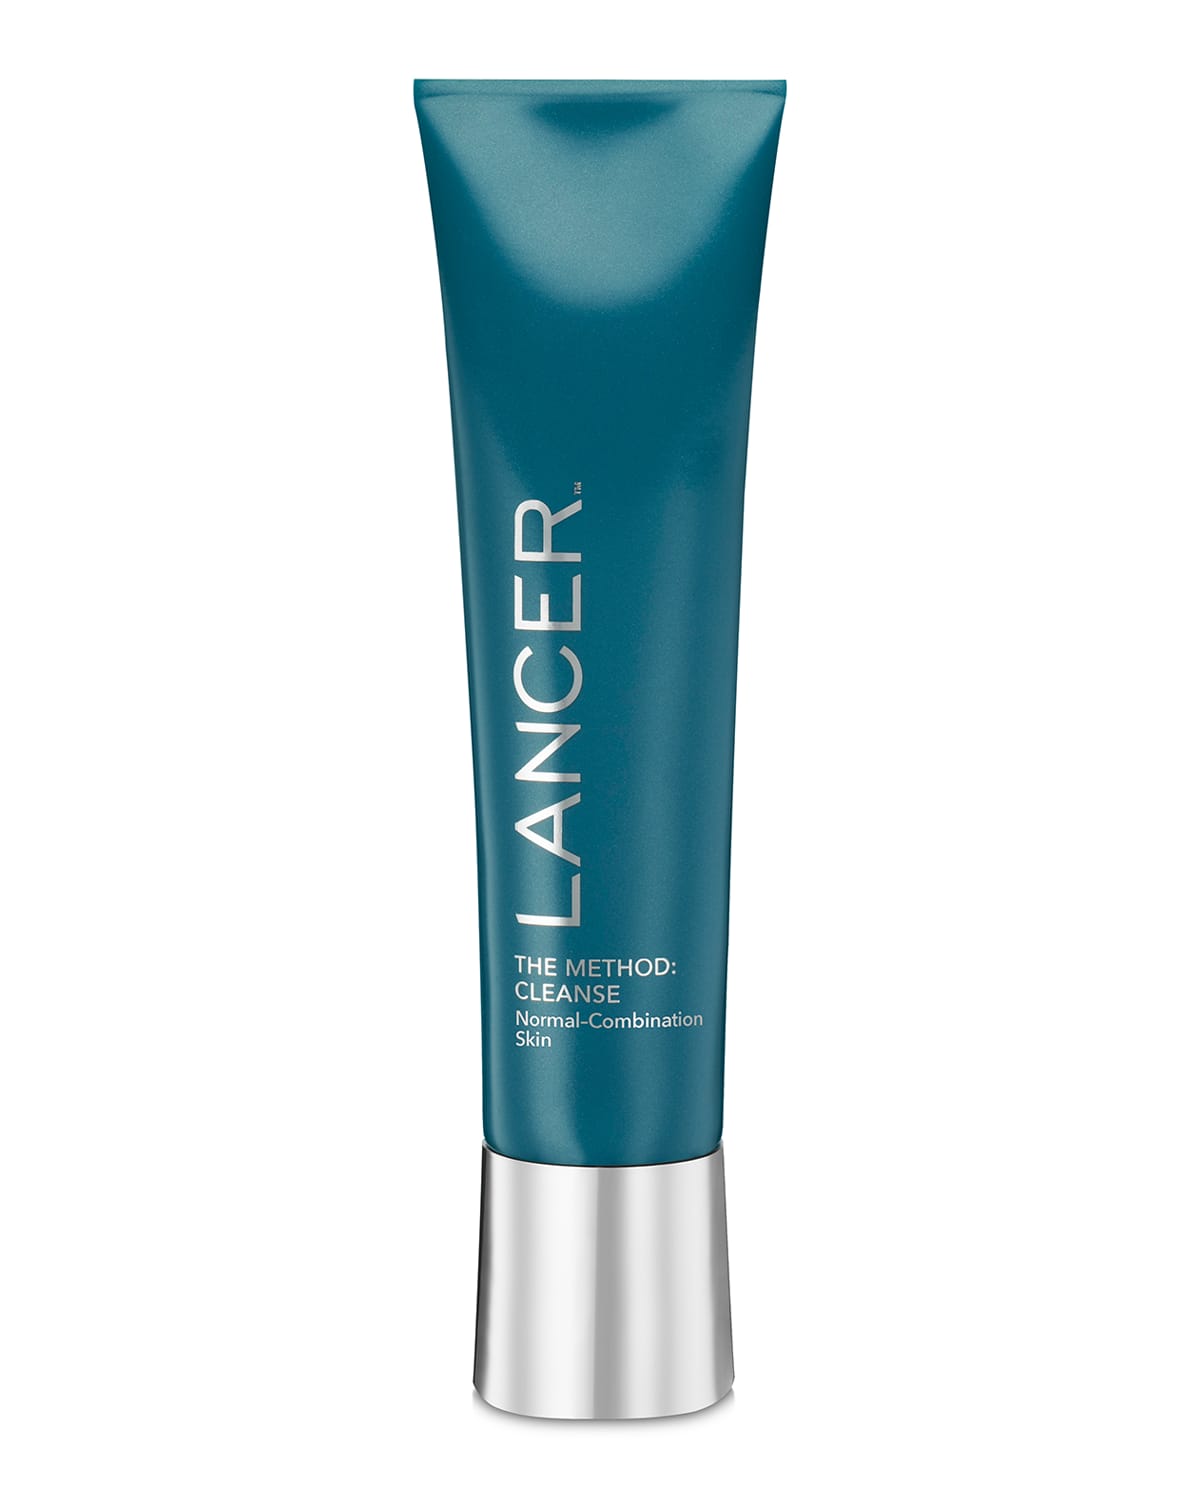 Lancer The Method: Cleanse Normal-Combination Skin, 4 oz.